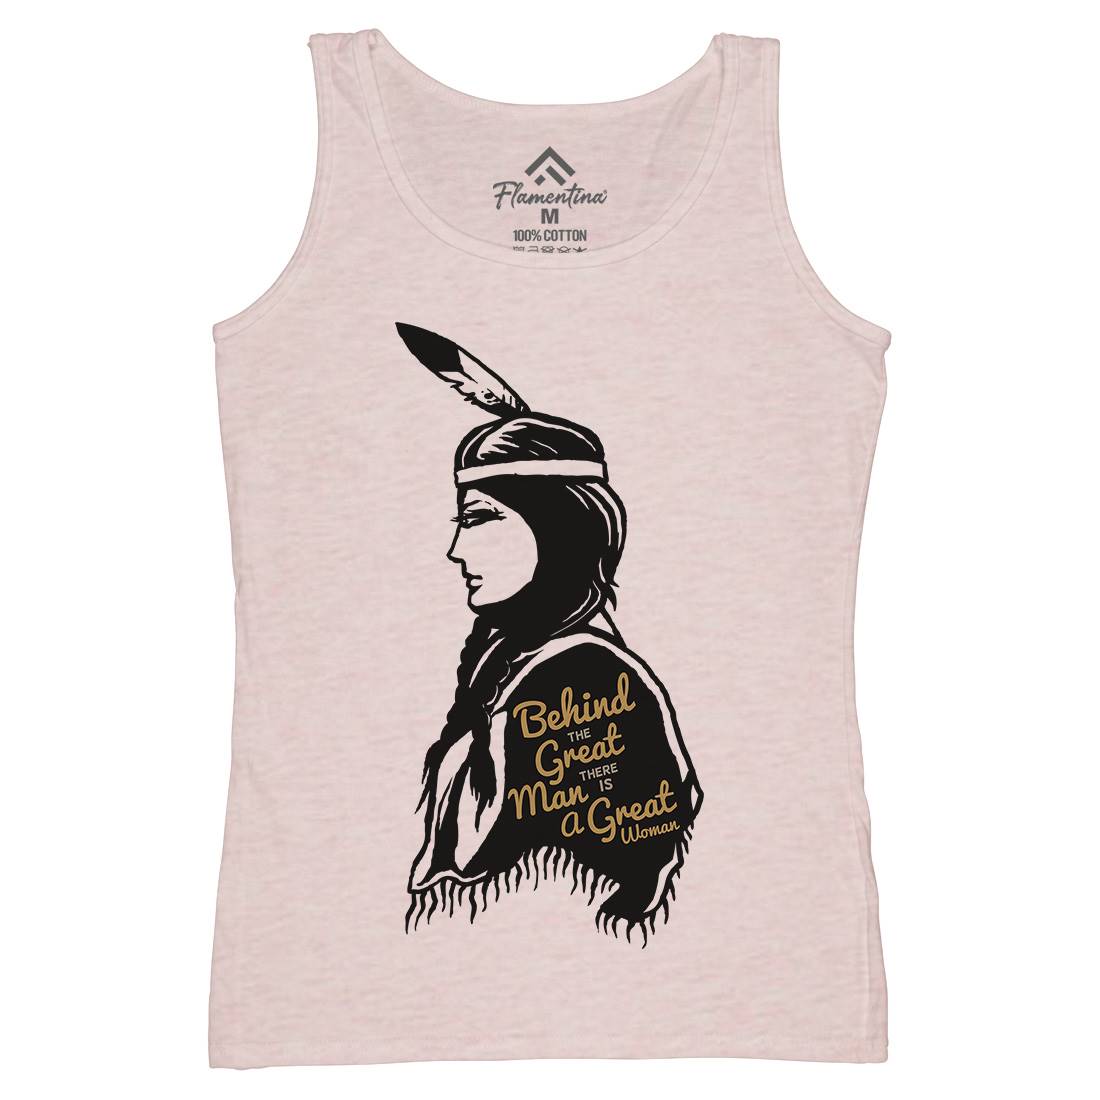 Great Woman Womens Organic Tank Top Vest Quotes A324